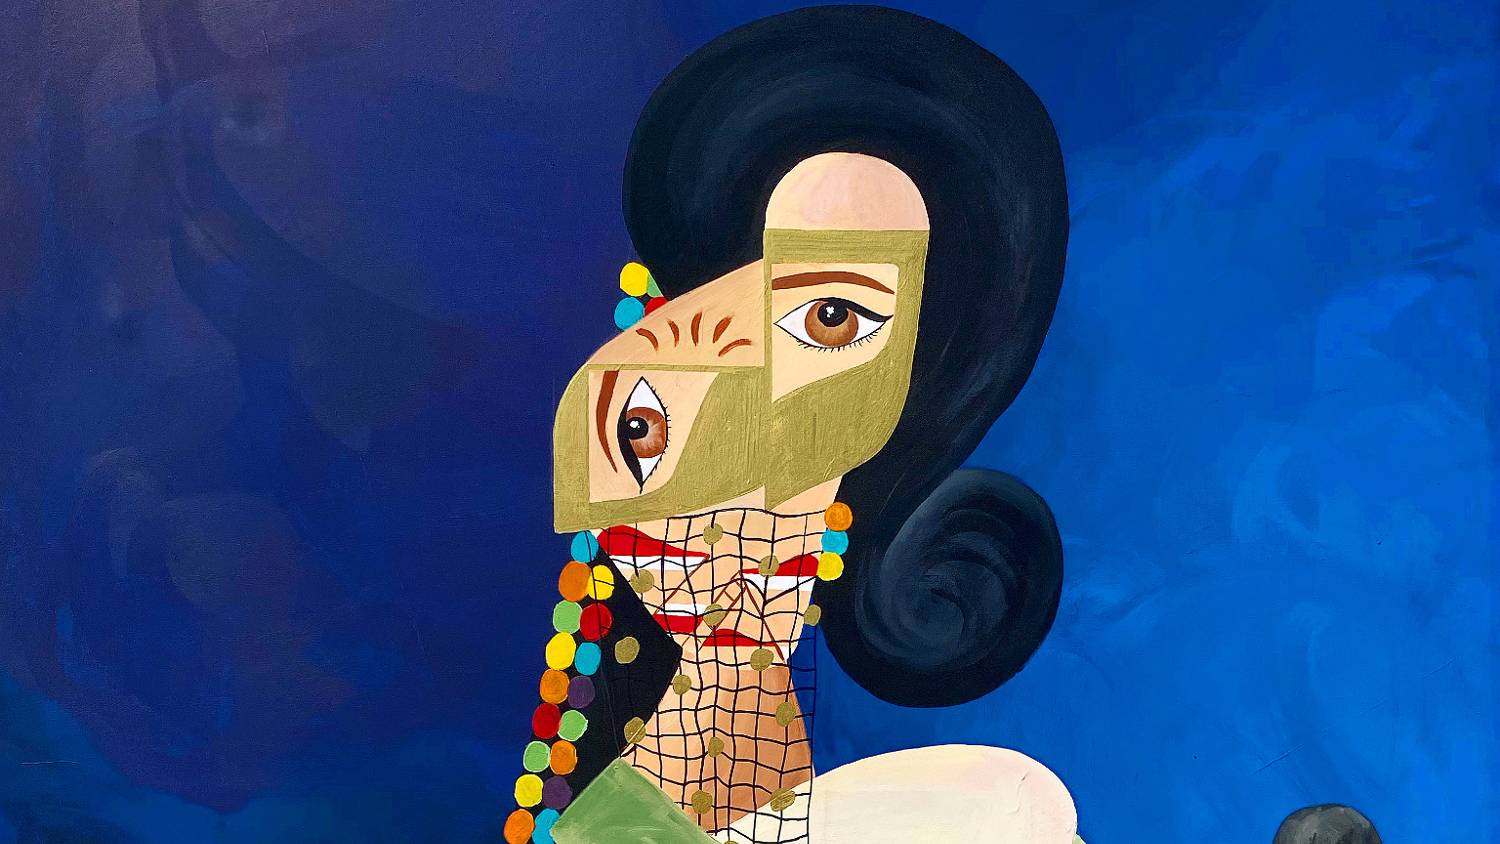 Saudi artist Faisal Al-Kheriji uses art to document a changing Saudi society, seen here is the top half of his 2019 painting, Farida (Public domain)